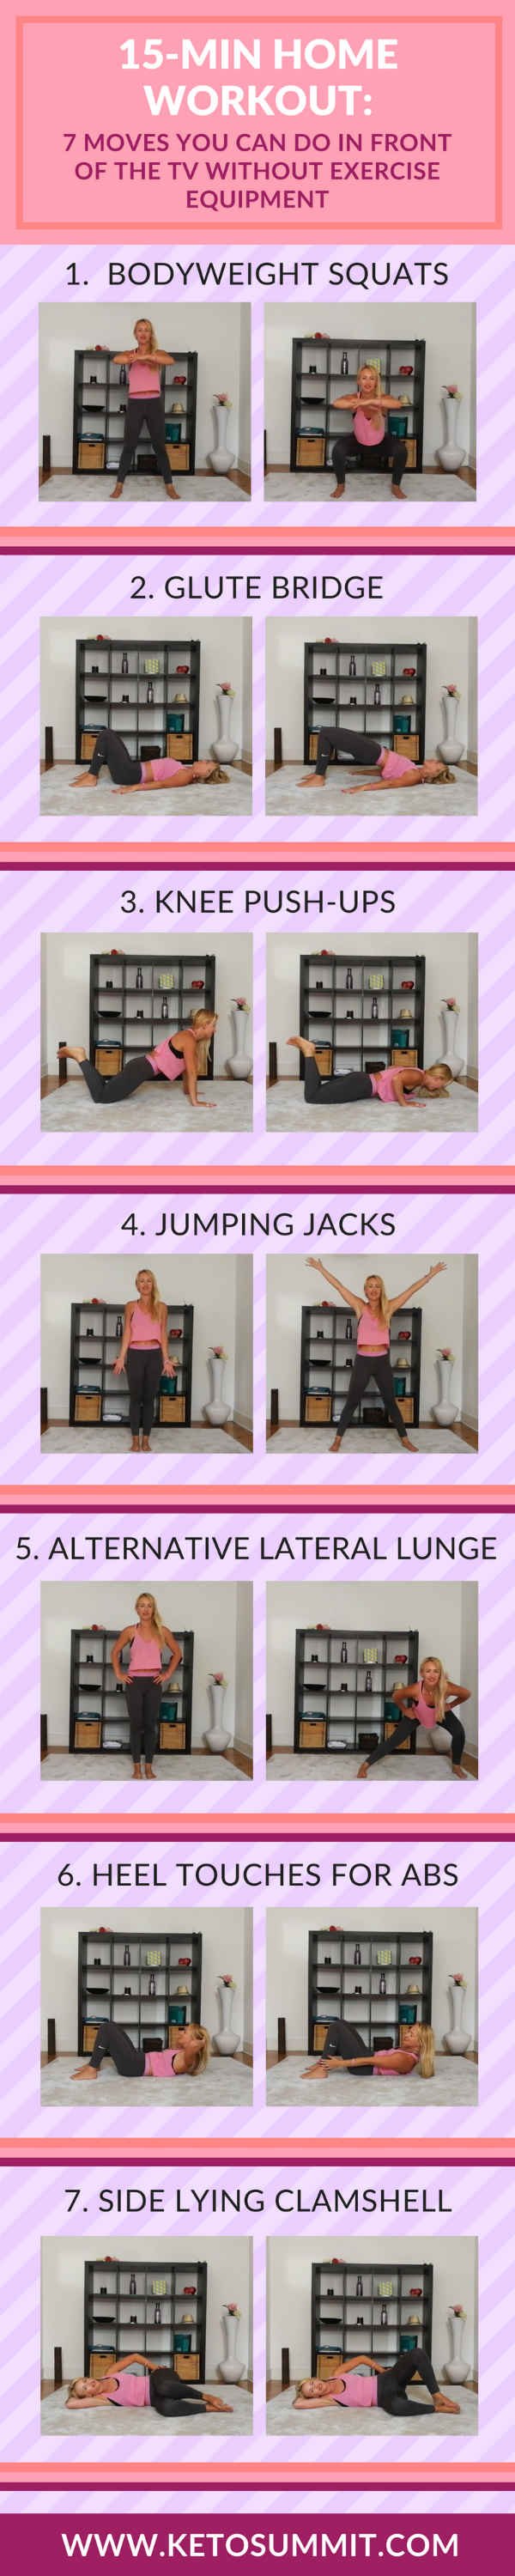 15-Min Home Workout: 7 Moves You Can Do In Front Of The TV Without Exercise Equipment #keto #infographic https://ketosummit.com/home-workout-no-exercise-equipment